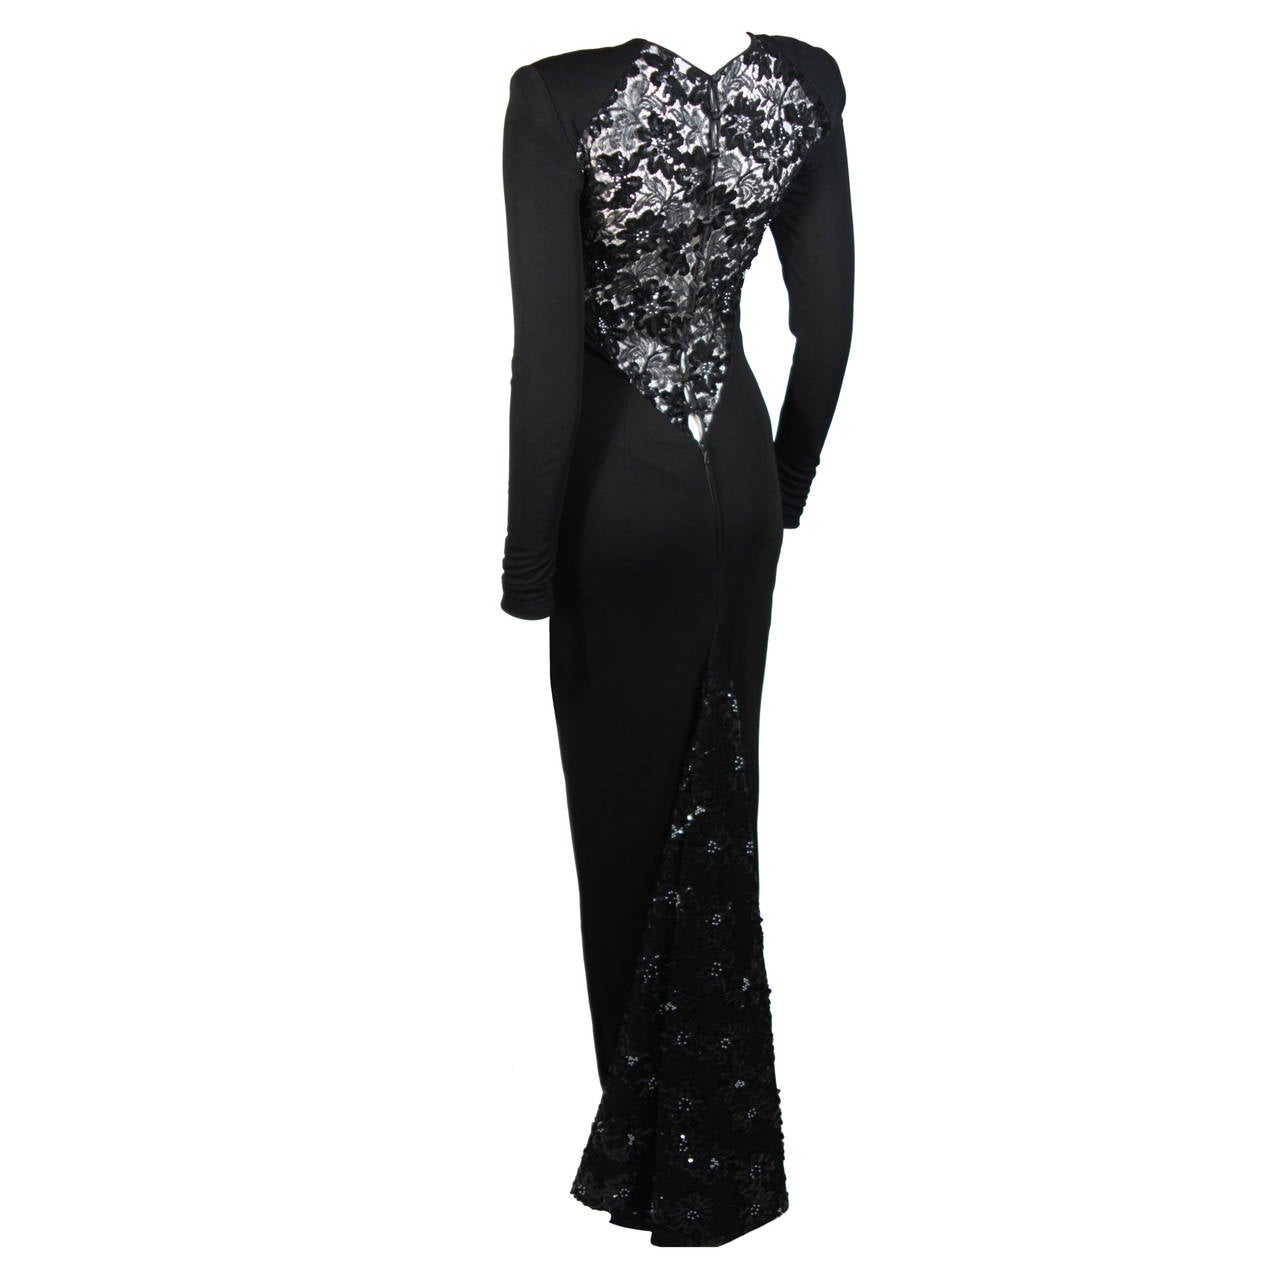 Vicky Tiel Black Jersey Gown with Sequin Lace Accents Size Small